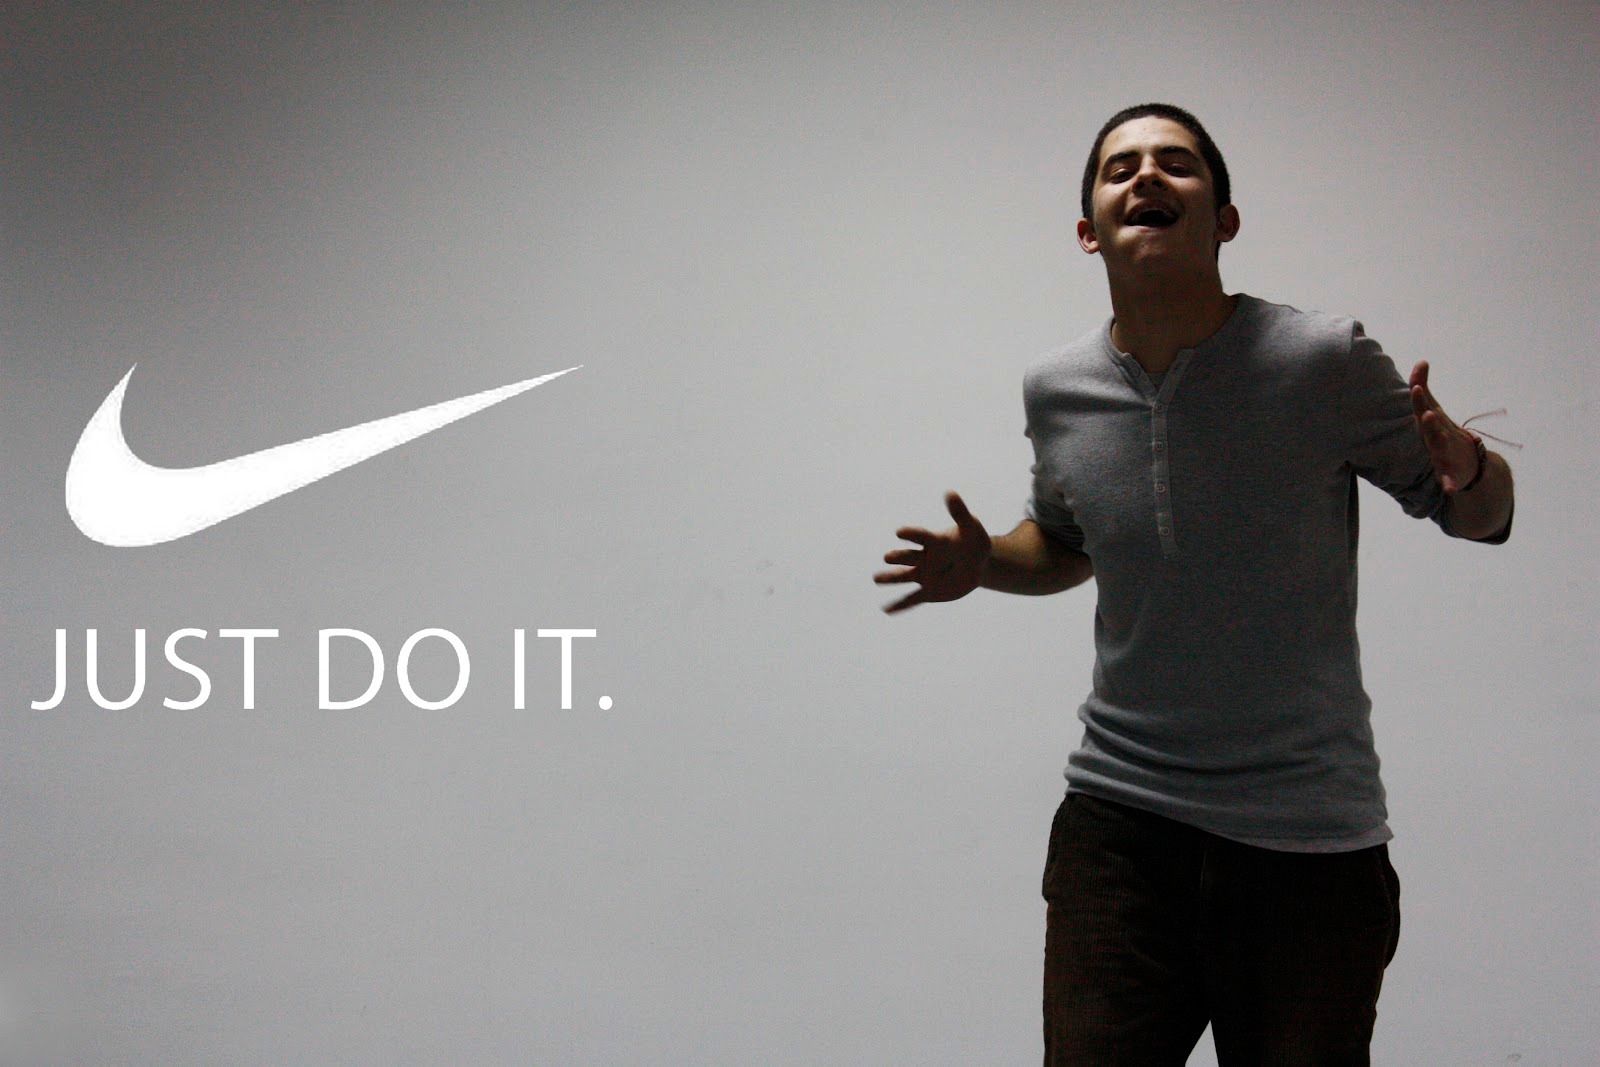 Just do it game. Найк Джаст. Nike just do it. Nike слоган. Реклама Nike just do it.